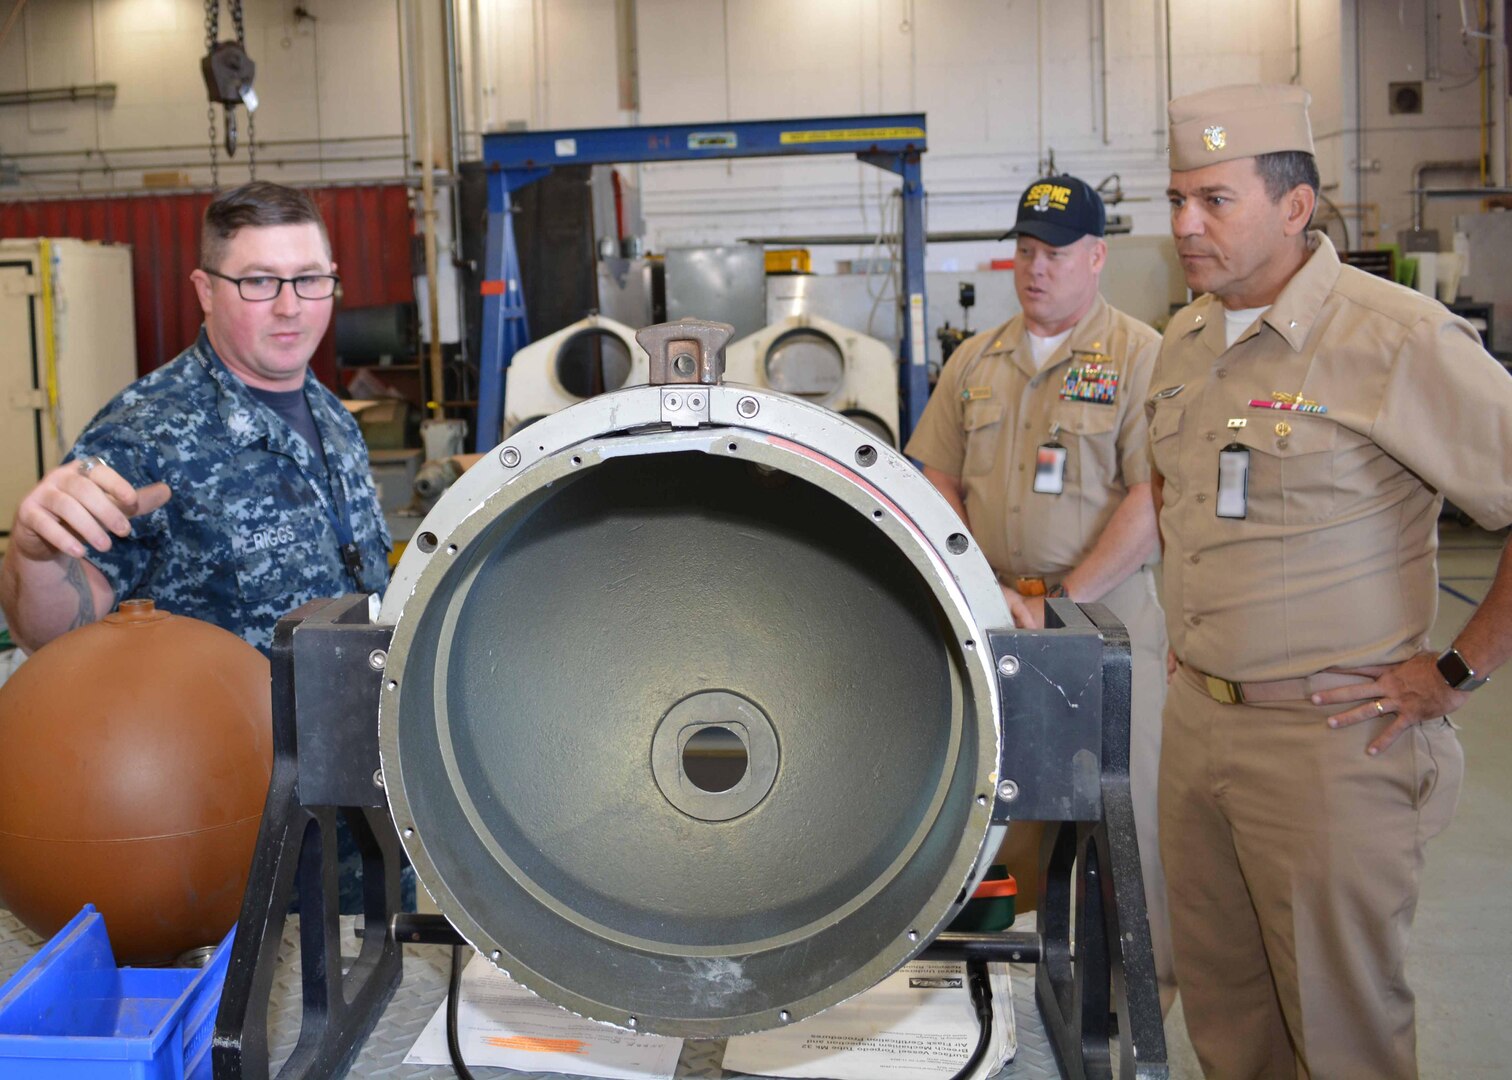 Machinist’s Mate 1st Class Earl Riggs discusses some of the maintenance involved with torpedo tubes at Southeast Regional Maintenance Center (SERMC). Williamson served as the Combat Systems Repair Officer at SERMC during a previous tour of duty. 